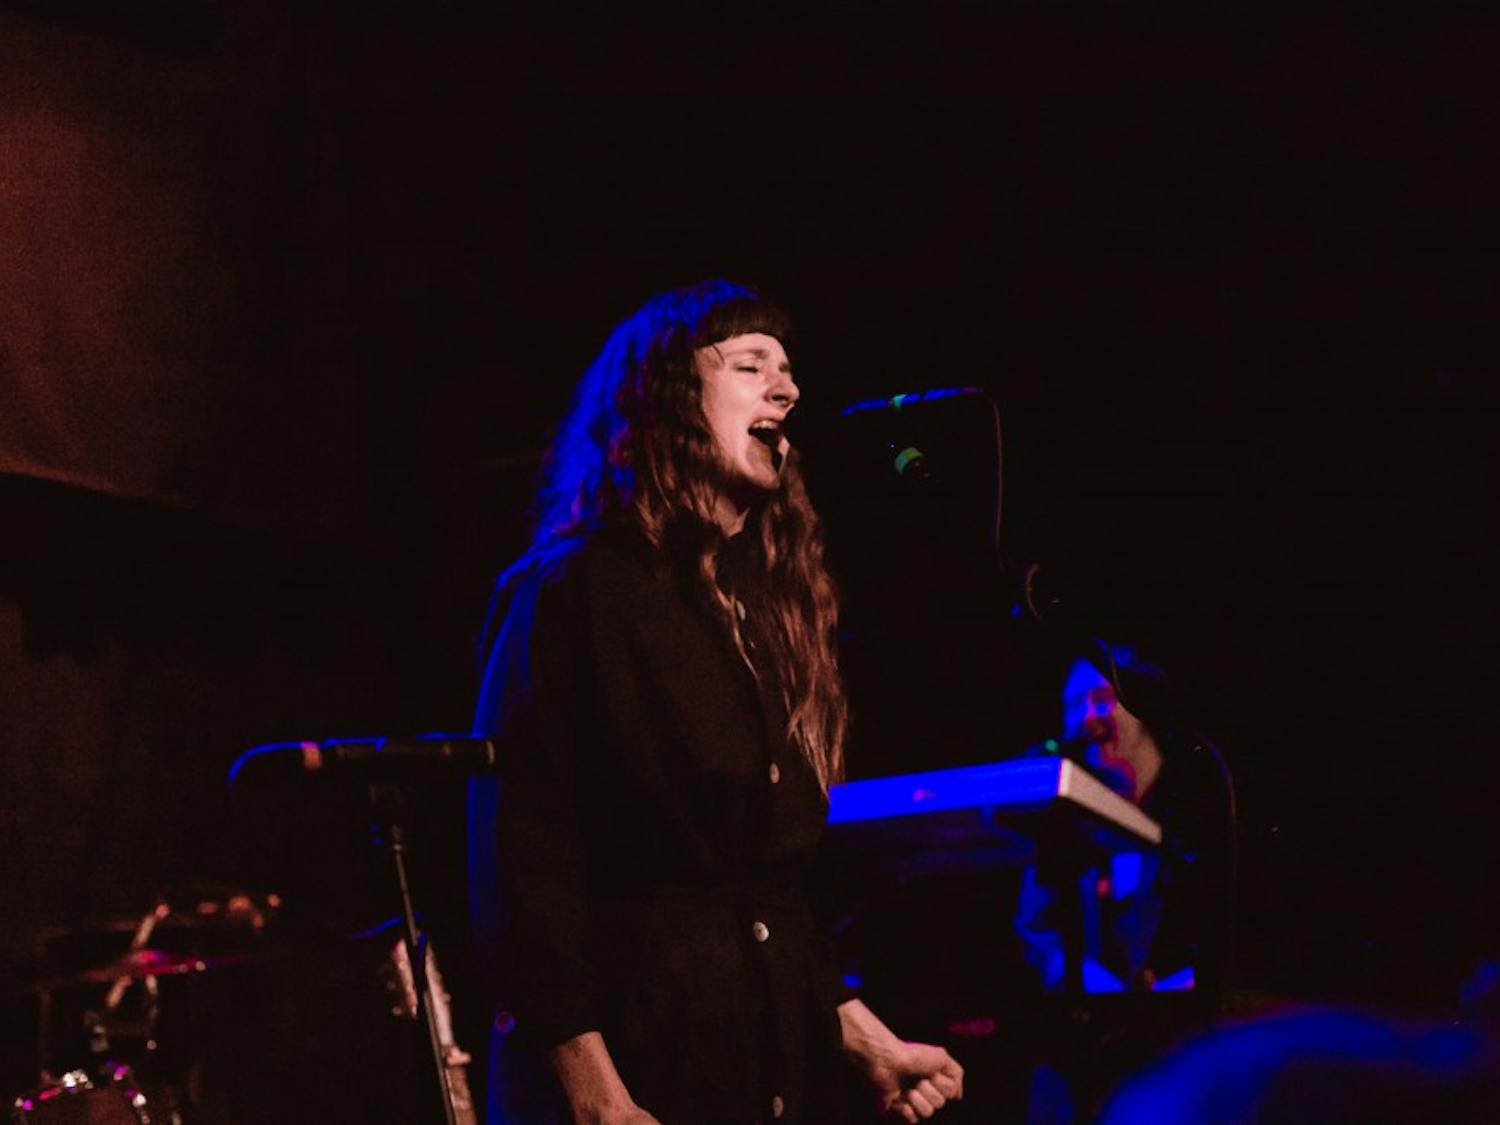 Lead singer Katie Crutchfield of indie rock group Waxahatchee delivered powerful vocals&nbsp;at High Noon Saloon on Thursday.